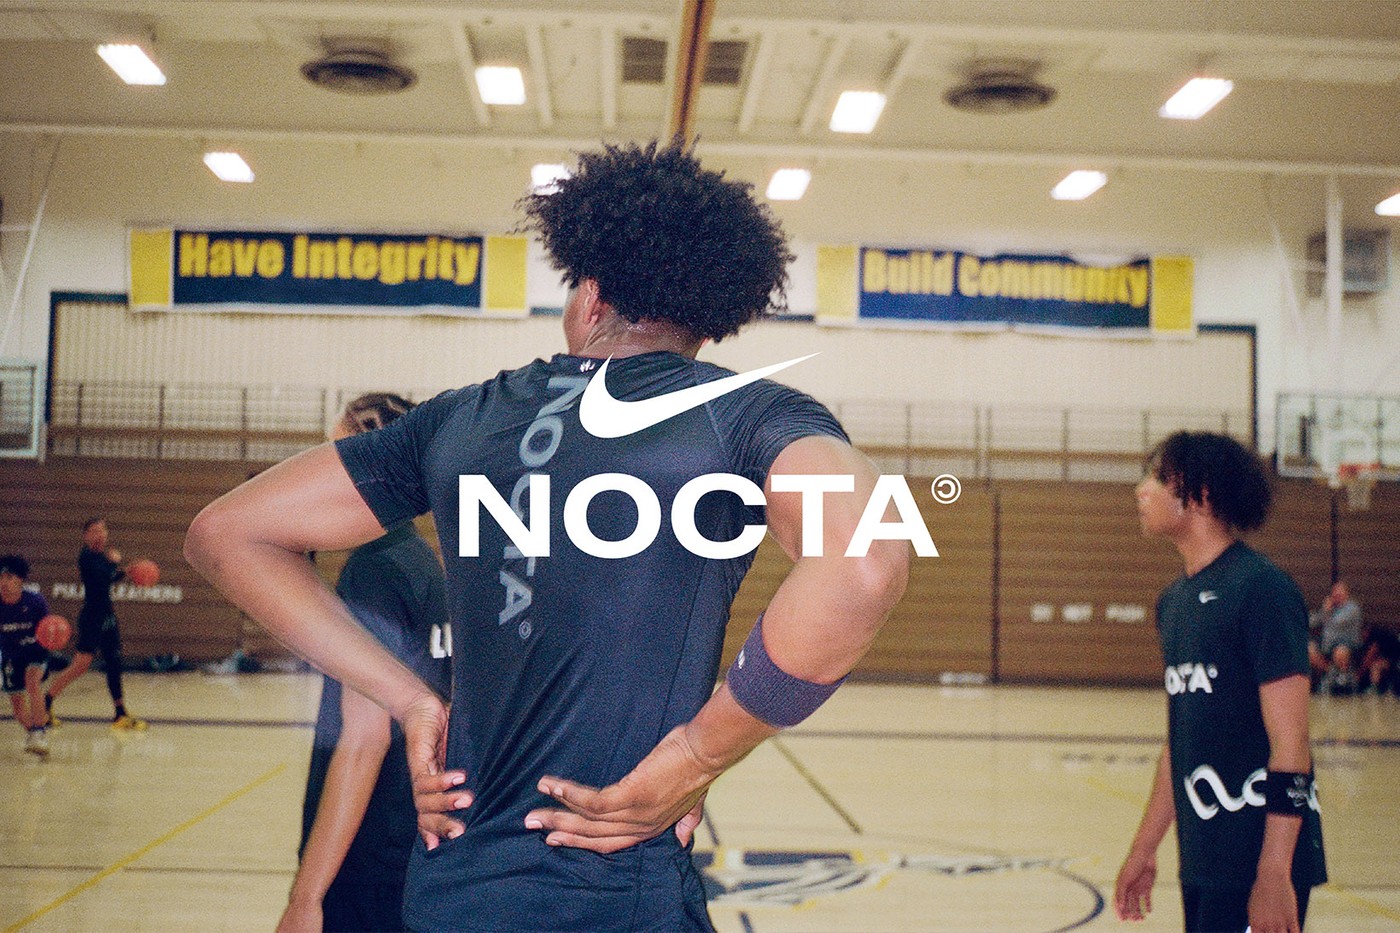 NOCTA x Nike's Dropping Basketball Apparel With Glide Sneakers